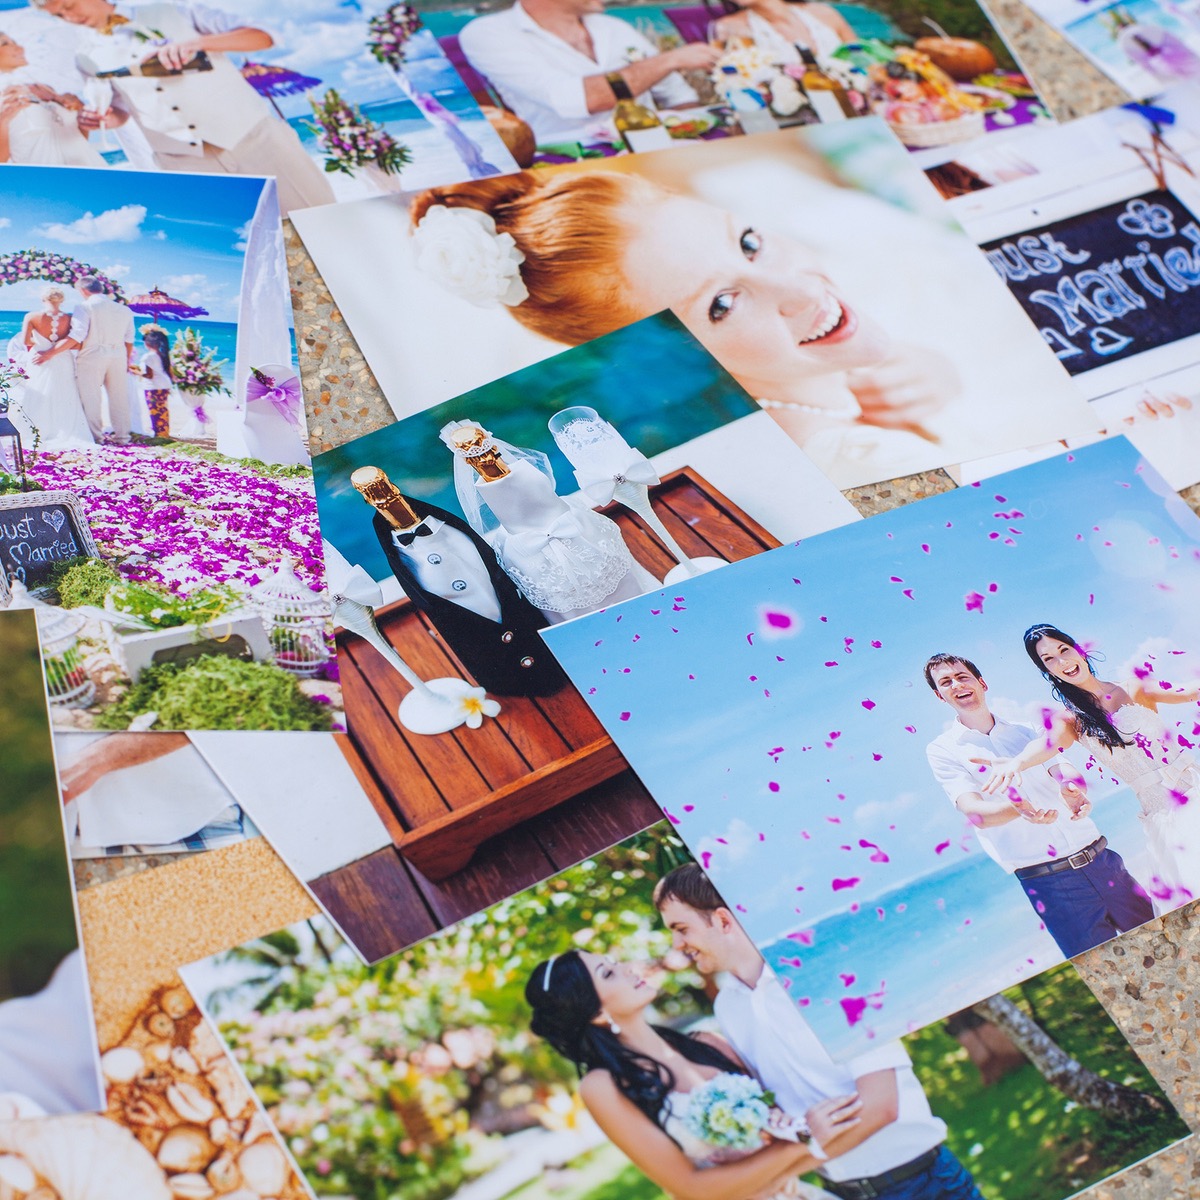 How to Get the Best Content for Your Wedding Scrapbook